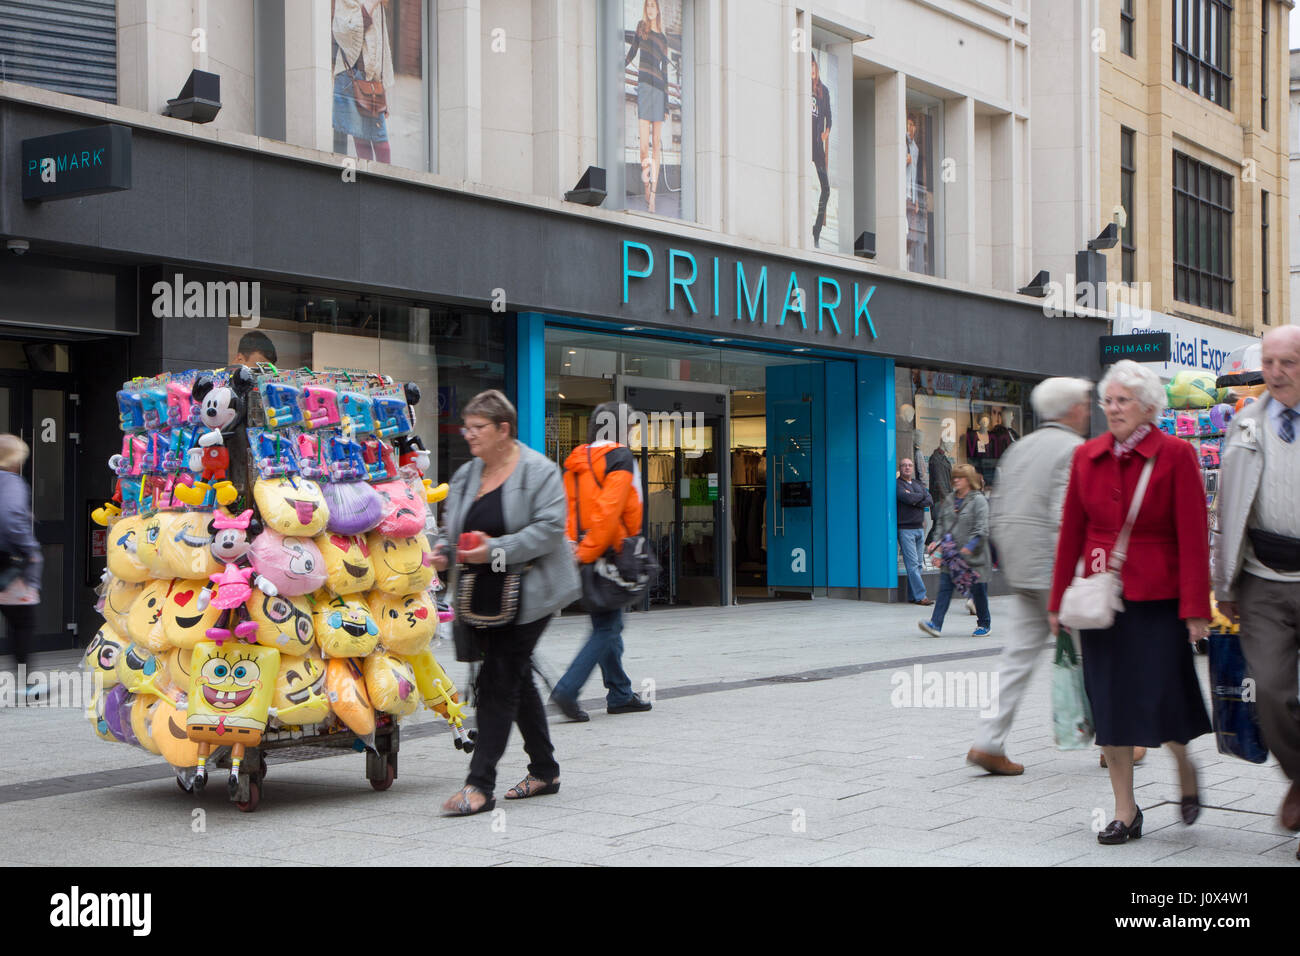 Primark on Queen Street, Cardiff. Vendors in the foreground are selling  emoji cushions etc Stock Photo - Alamy